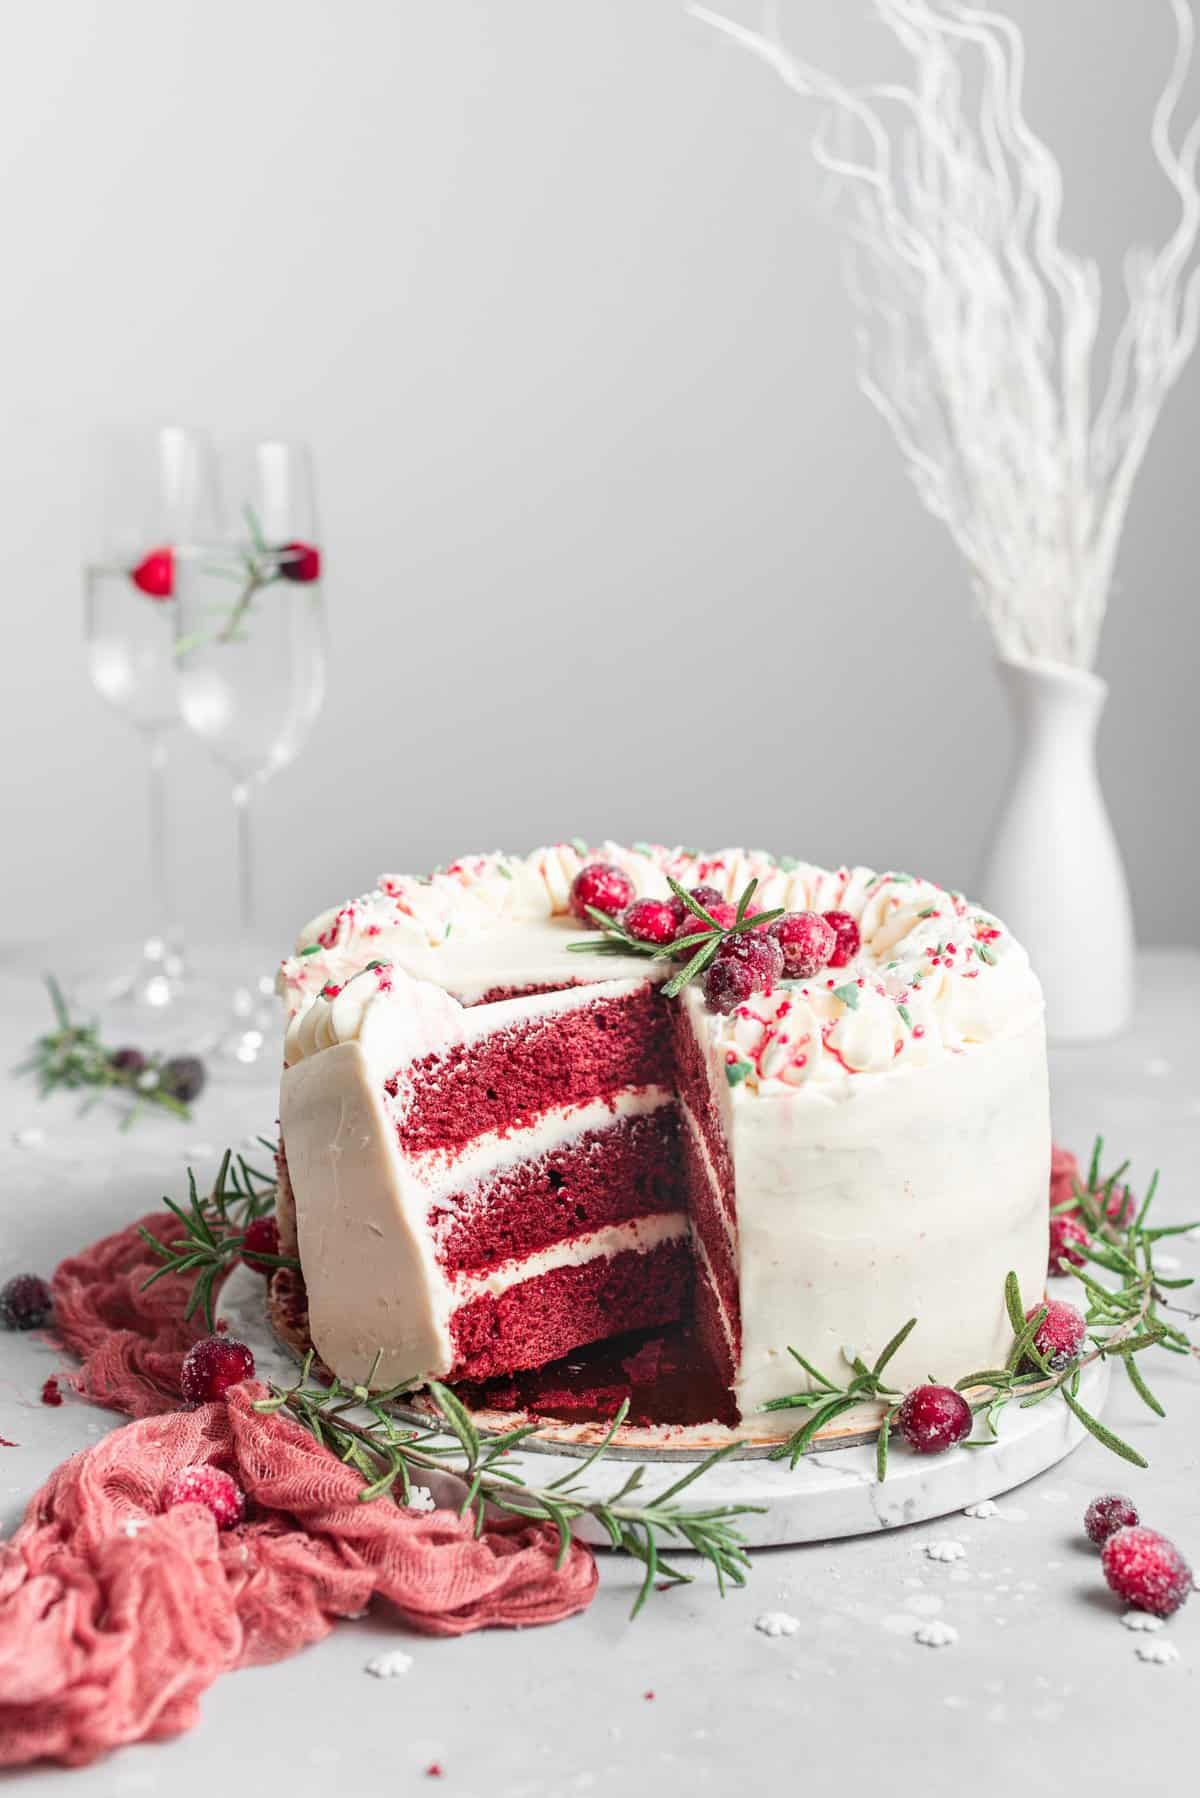 Cake partially cut into slices showing the red velvet layers on white cake plate. 